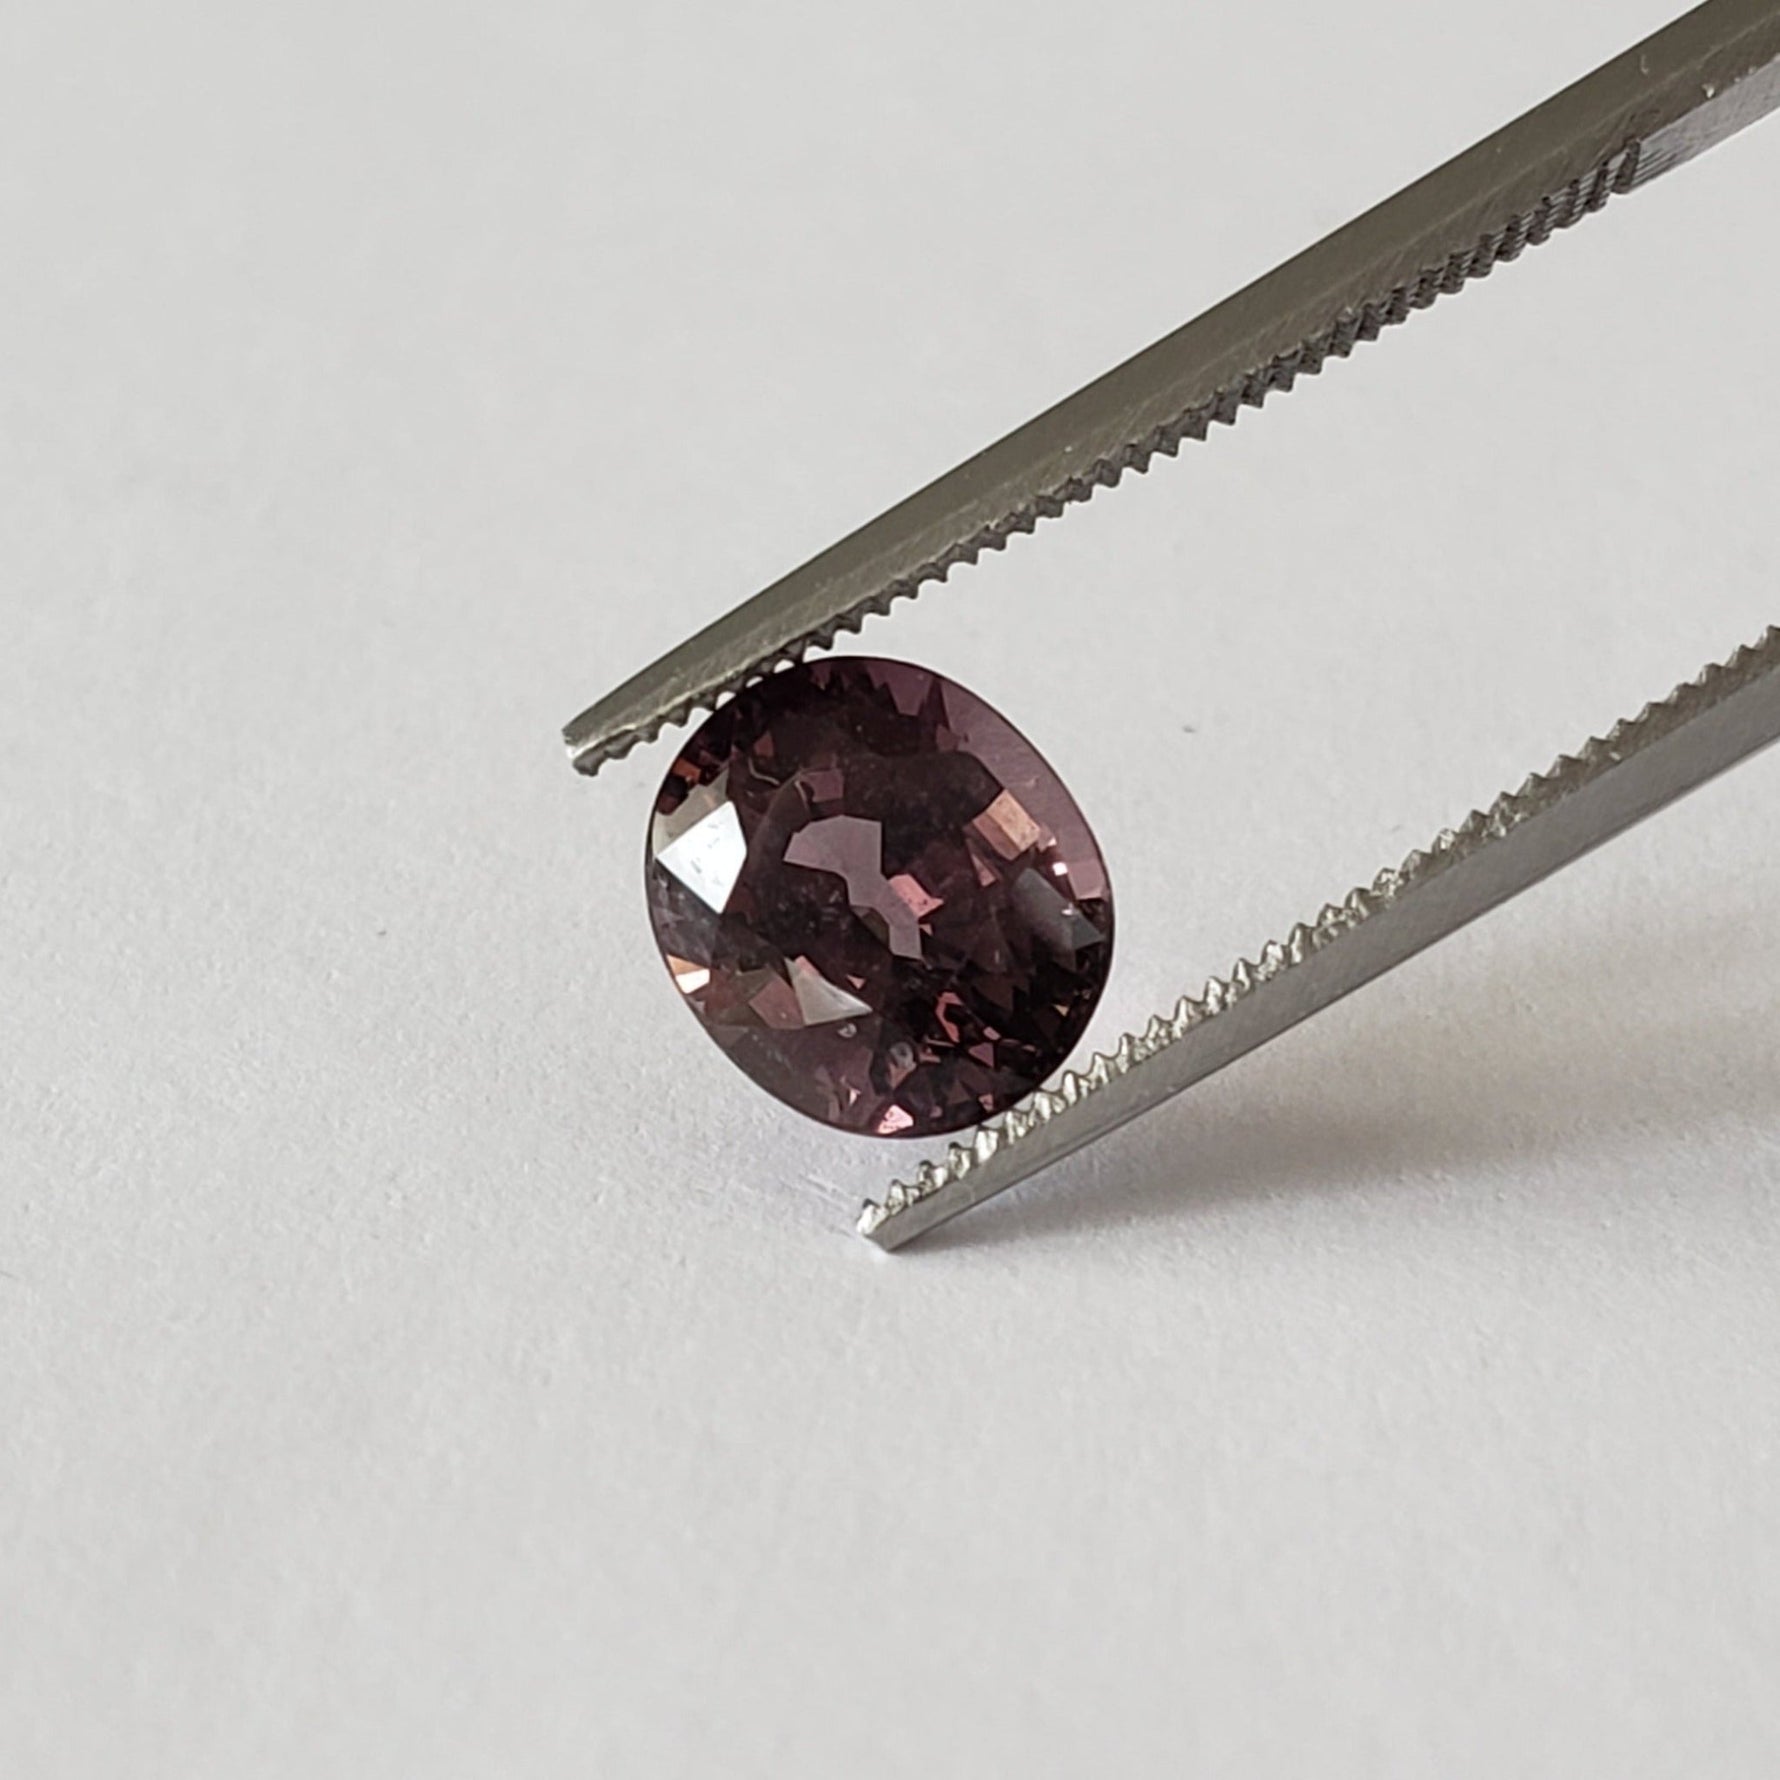 Spinel | Oval Cut | Purple | Natural | 8x6.8mm 2.1ct